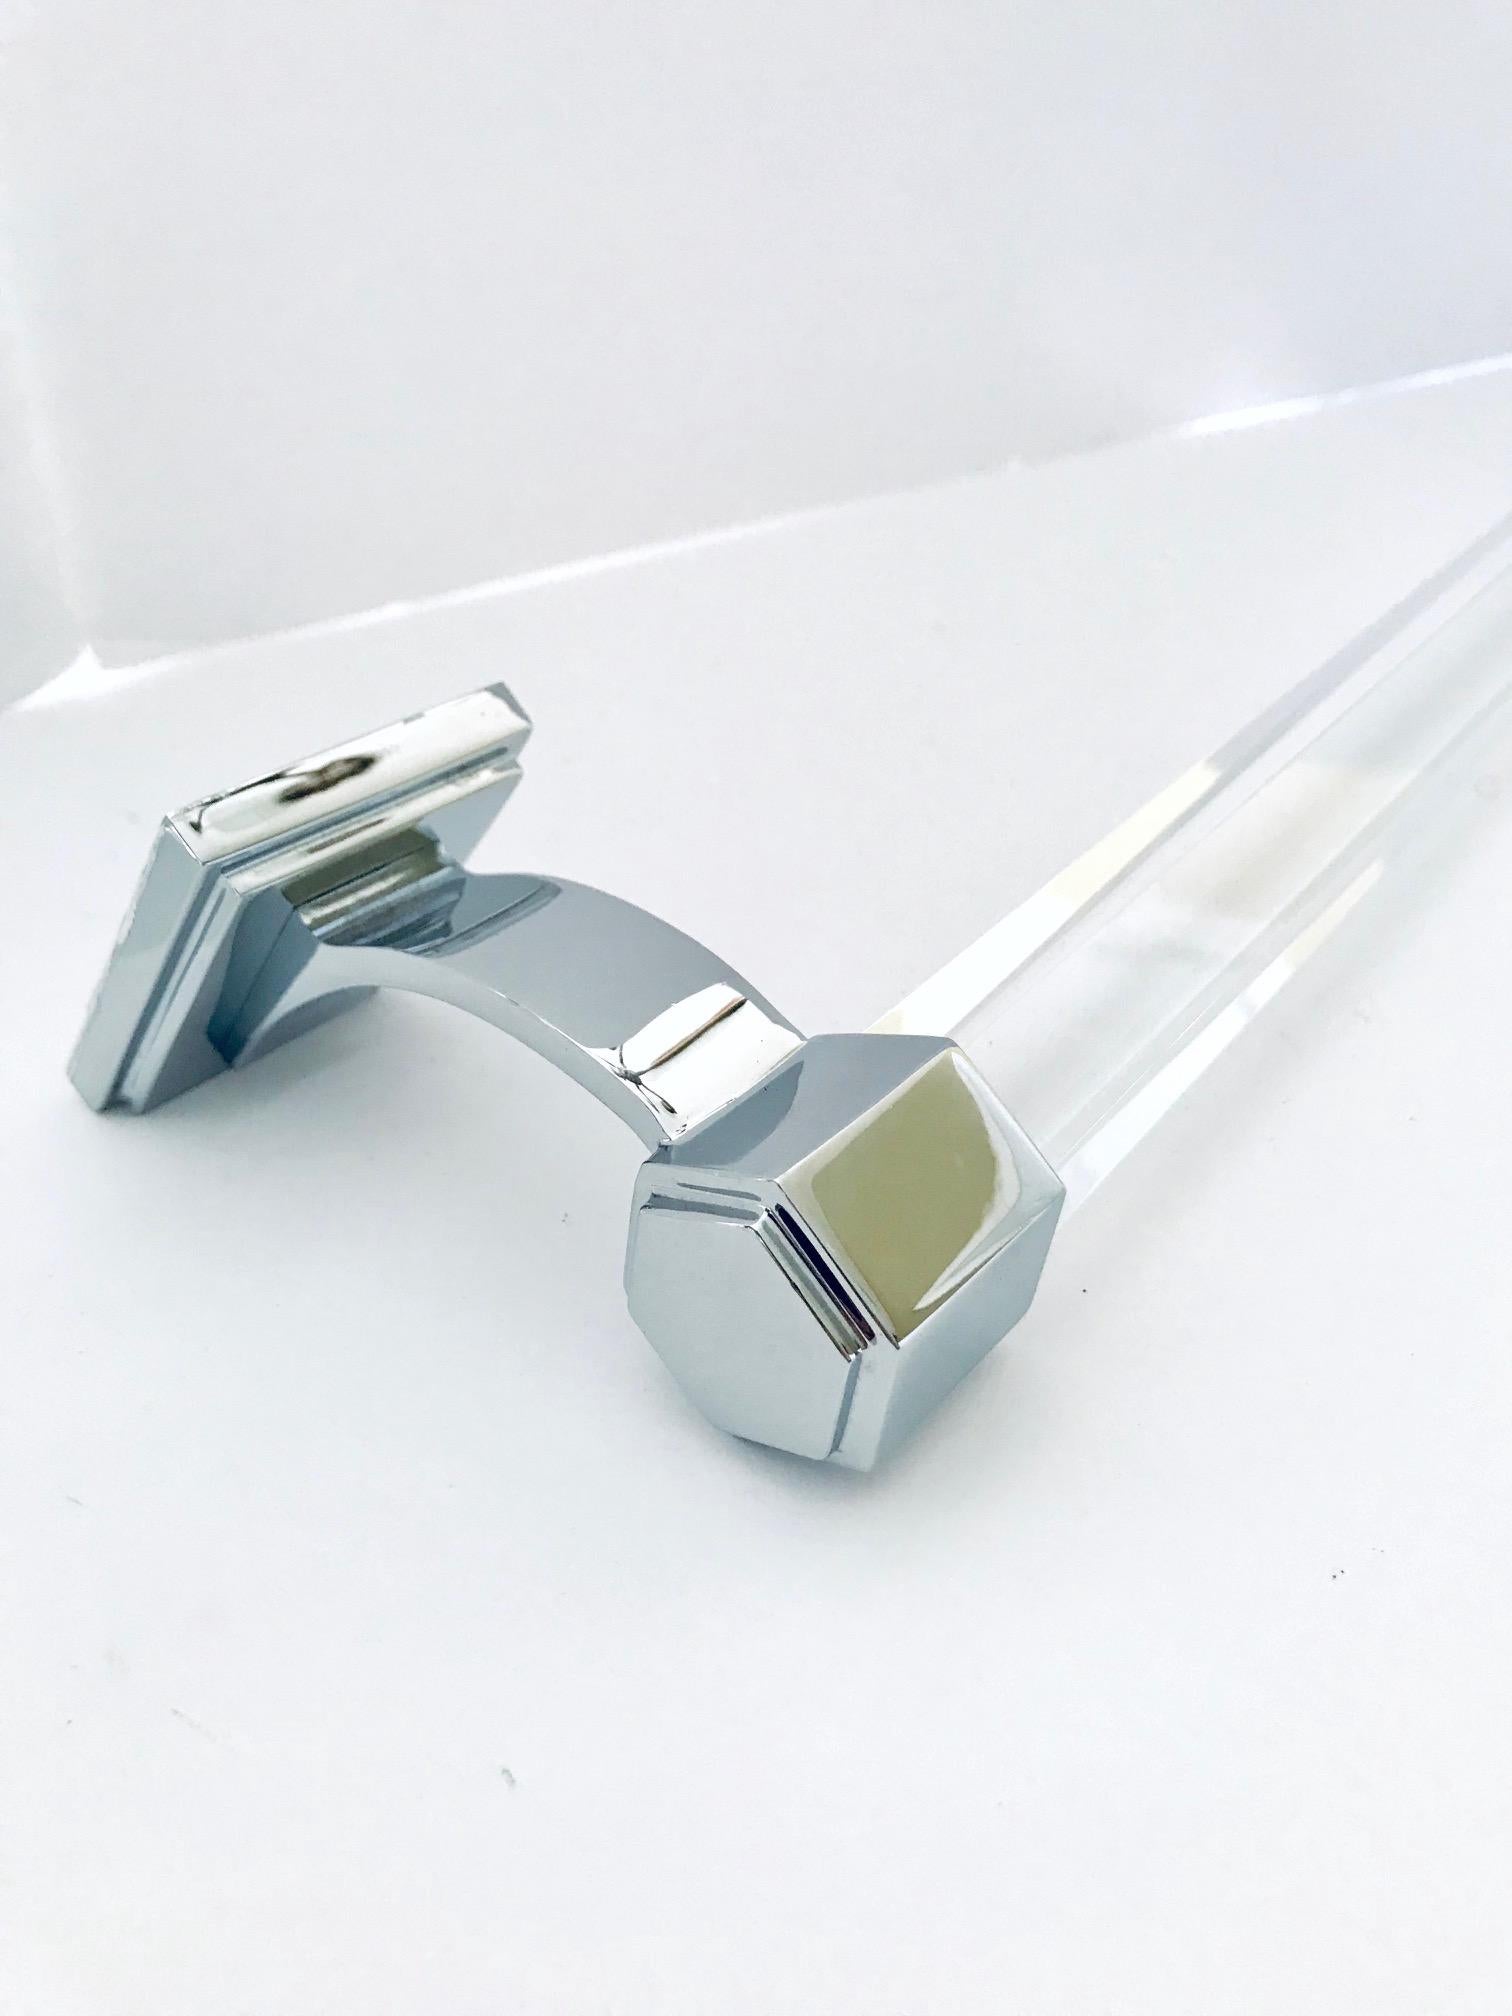 Art Deco Vintage Faceted Glass and Nickel Towel Holder